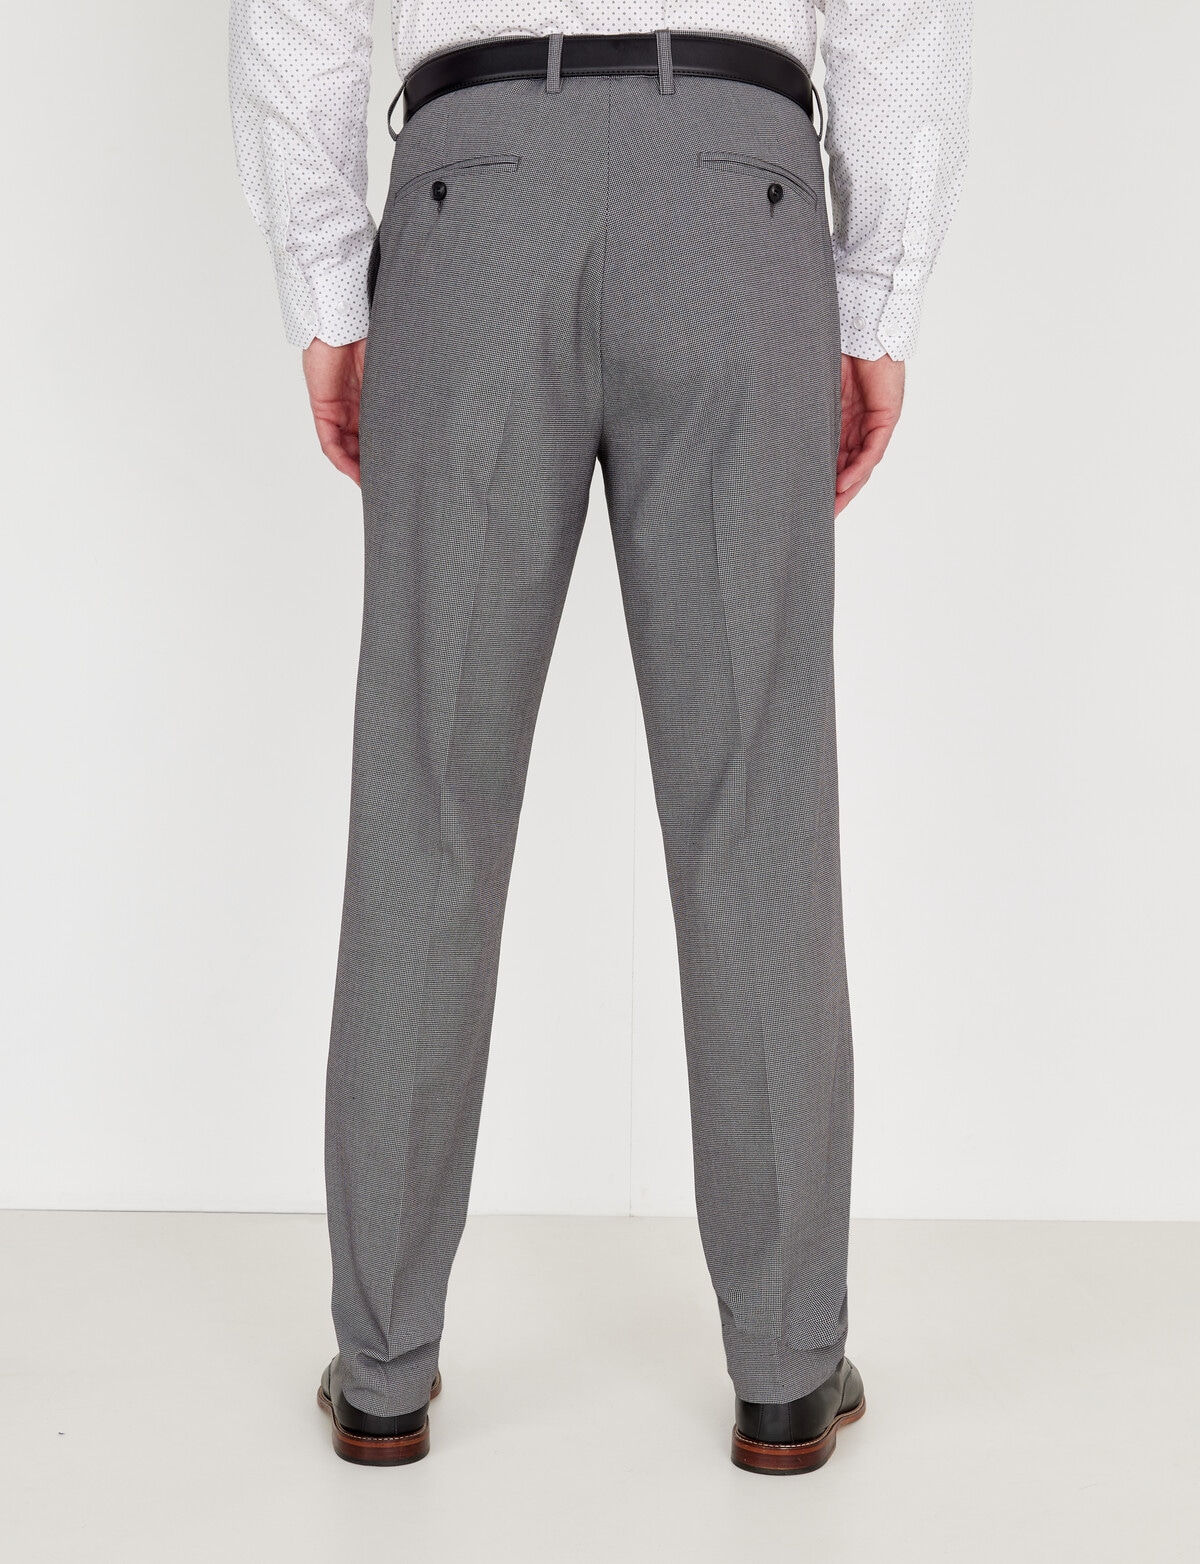 Worsted Light Gray Wool Suit : Made To Measure Custom Jeans For Men &  Women, MakeYourOwnJeans®